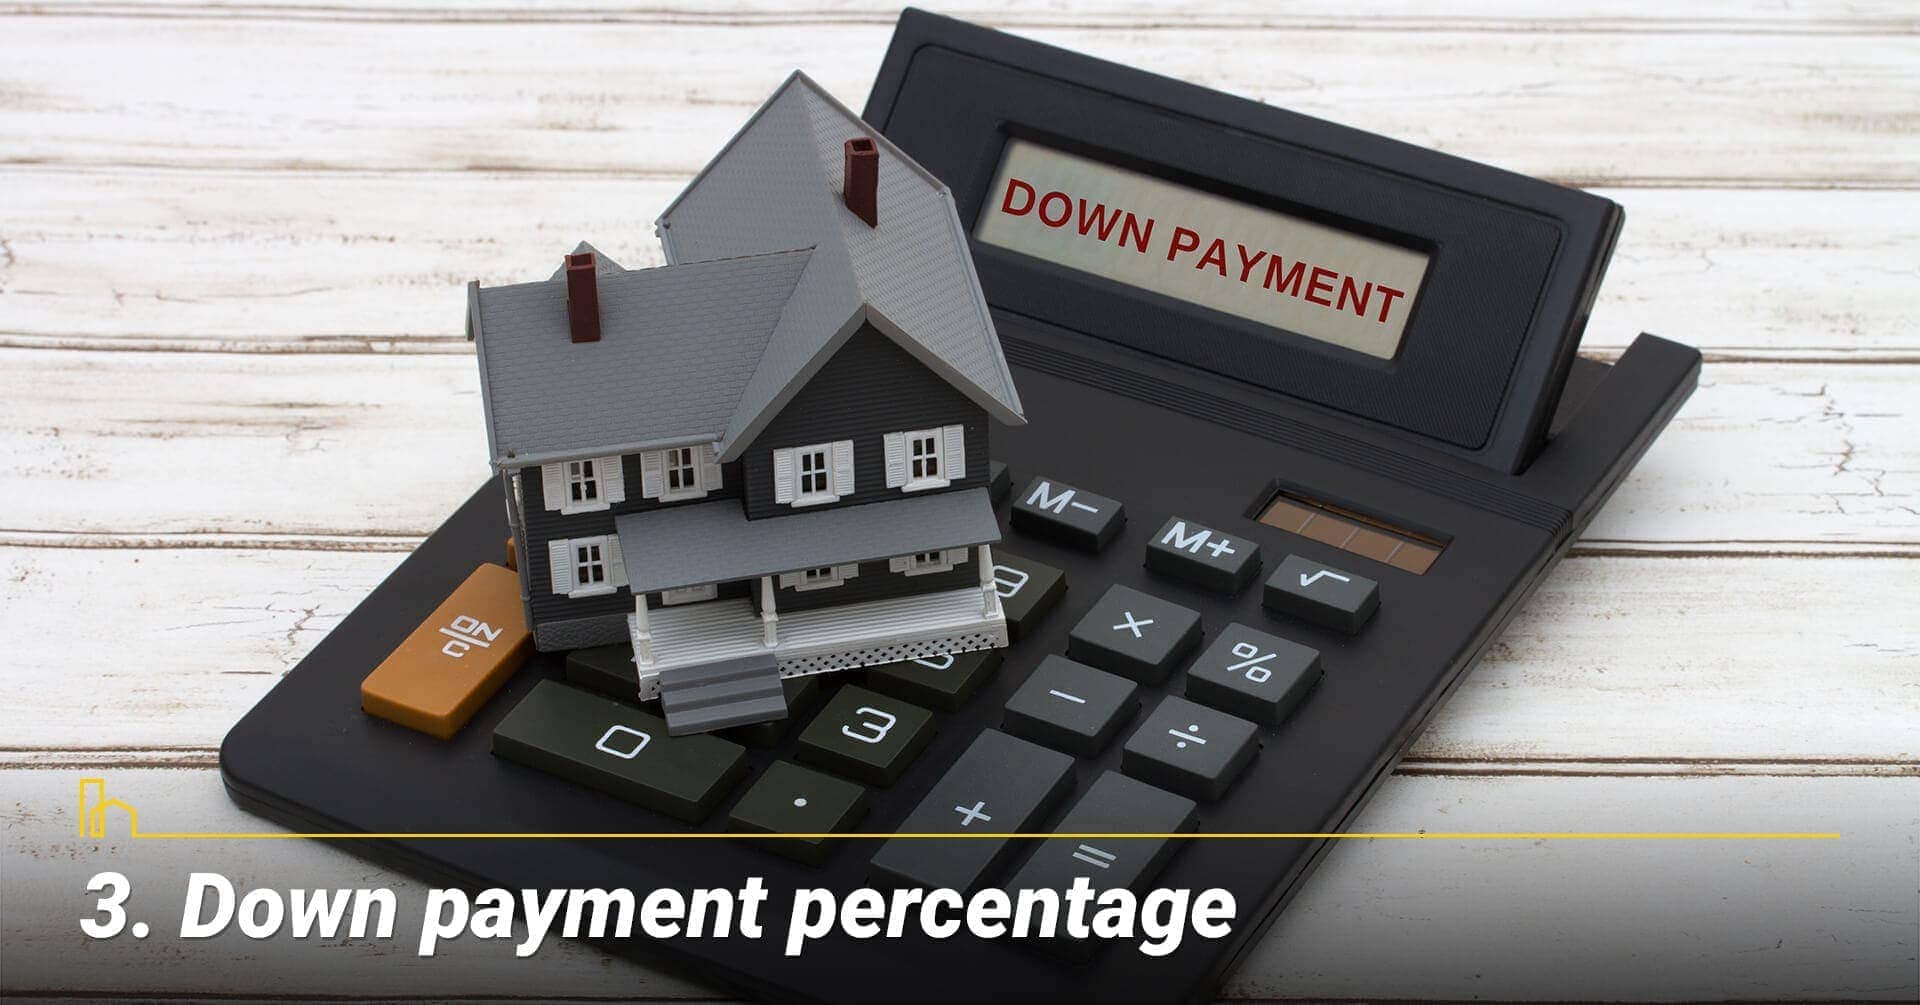 Down payment percentage, amount of down payment